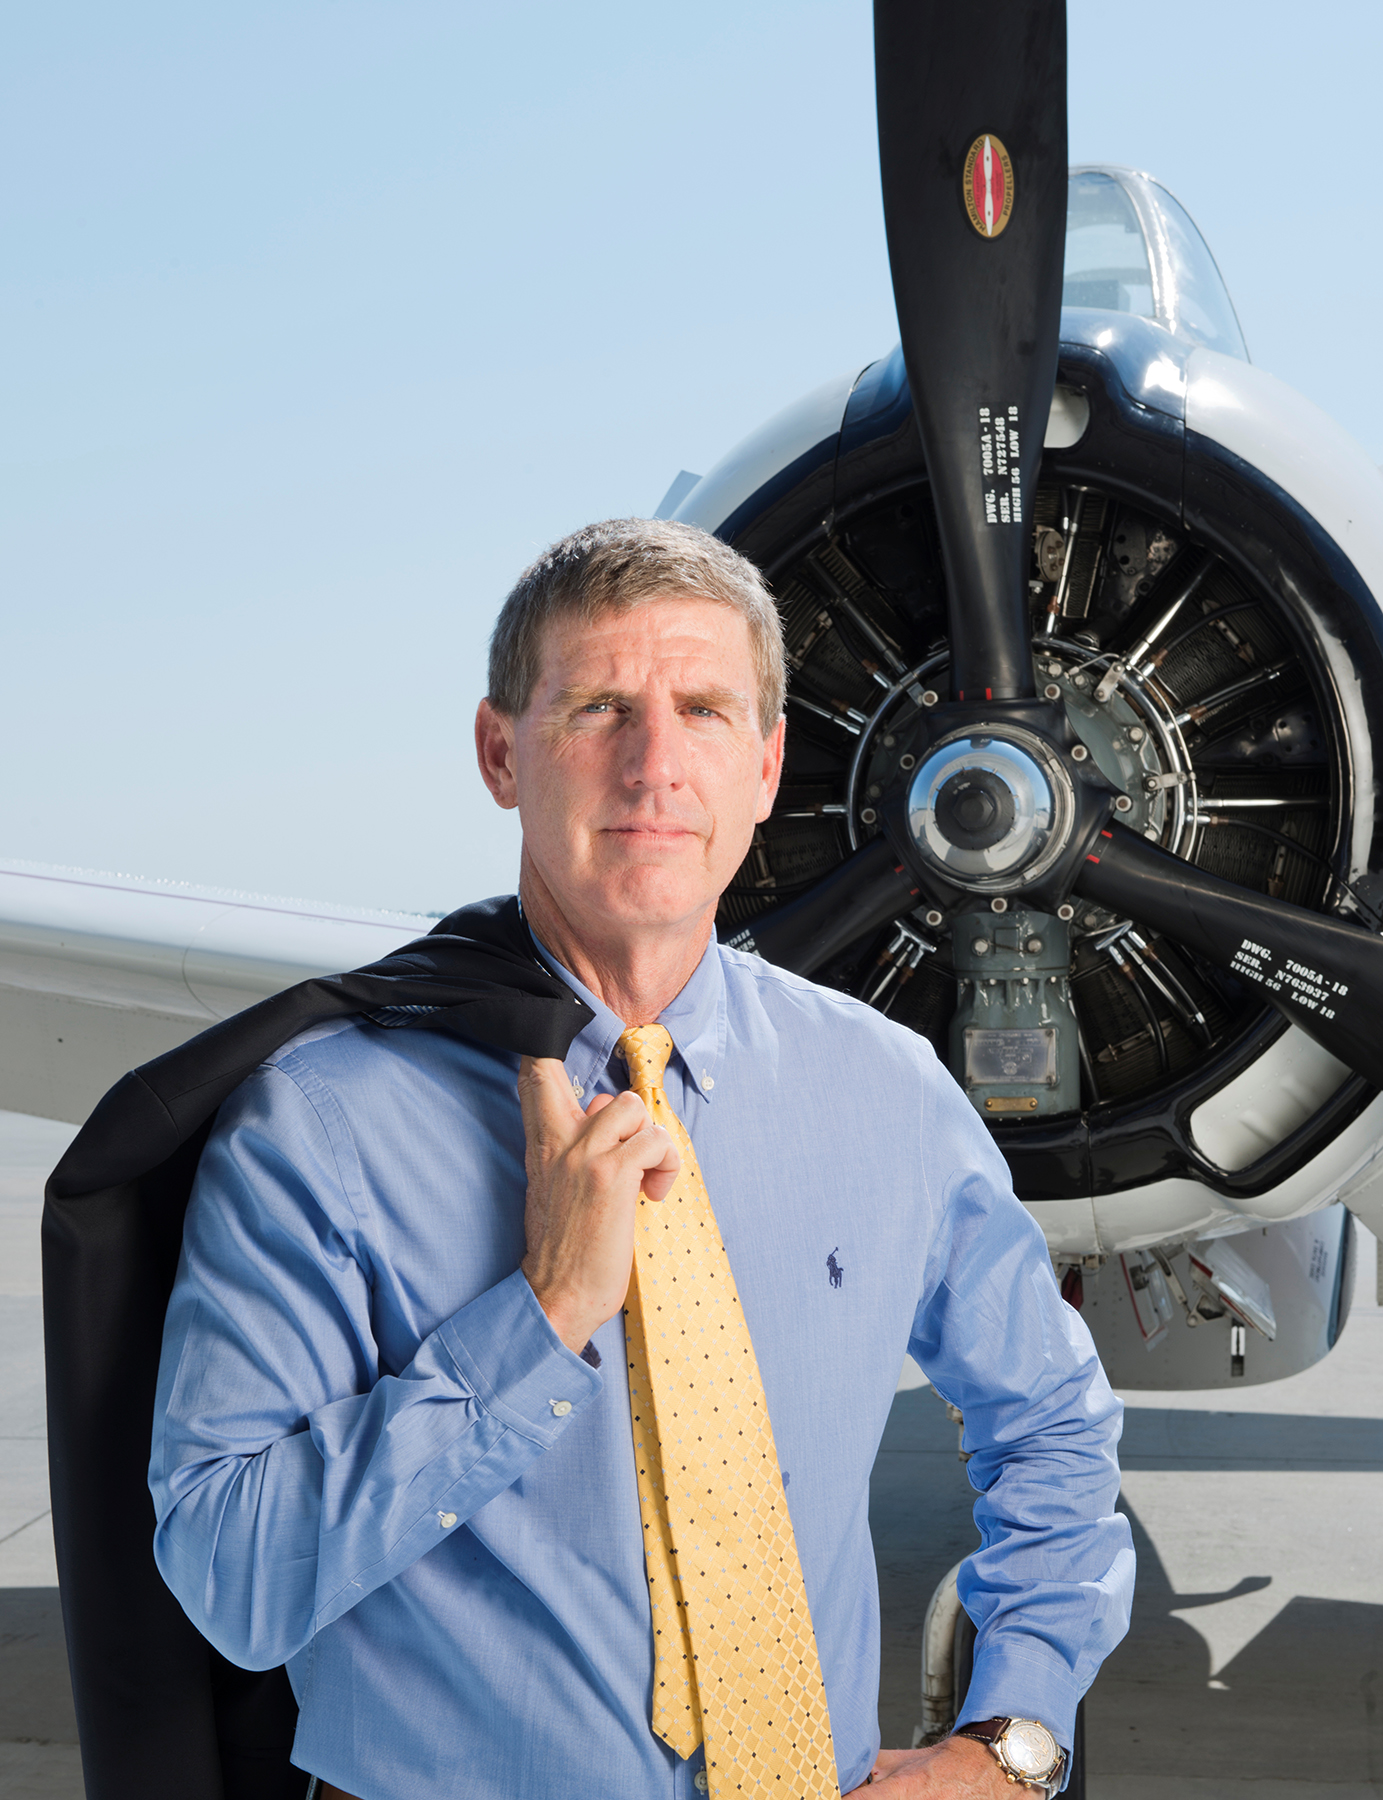 Craig Picken, Managing Partner, NorthStar Group, will be a guest speaker at the professional development and safety seminar presented by the Southern California Aviation Association on September 9.